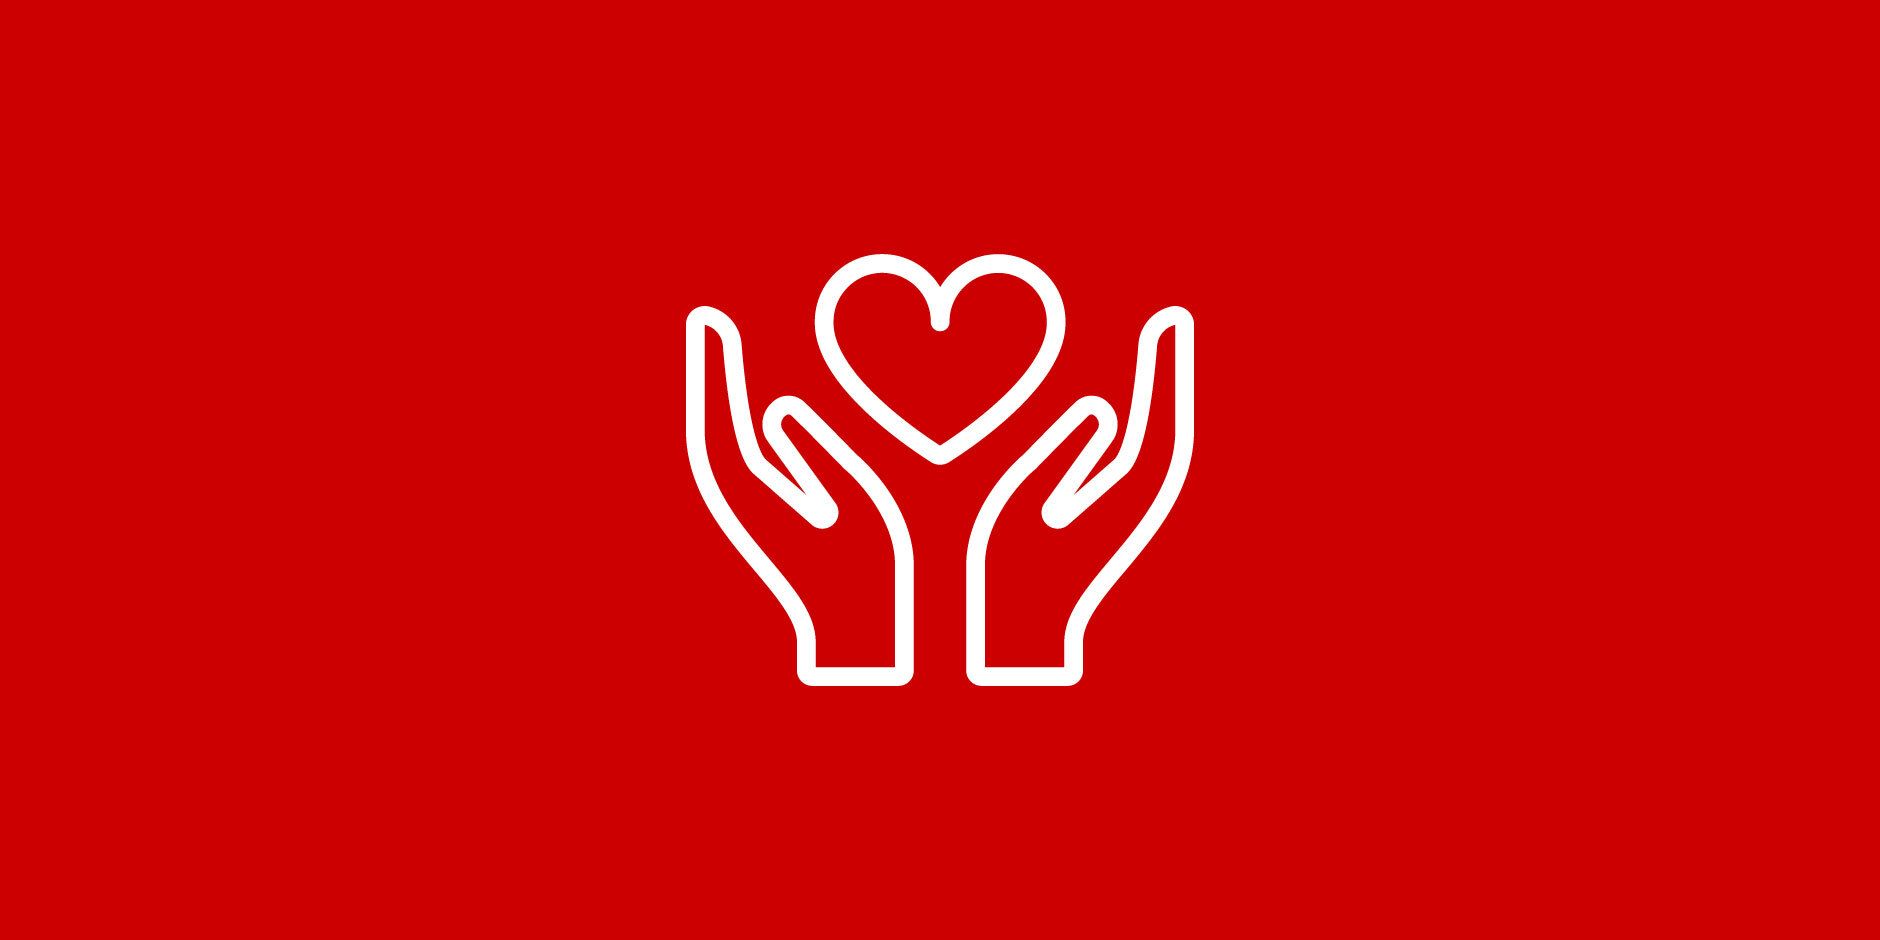 "An illustration of two hands holding a heart in white outline against a red background"